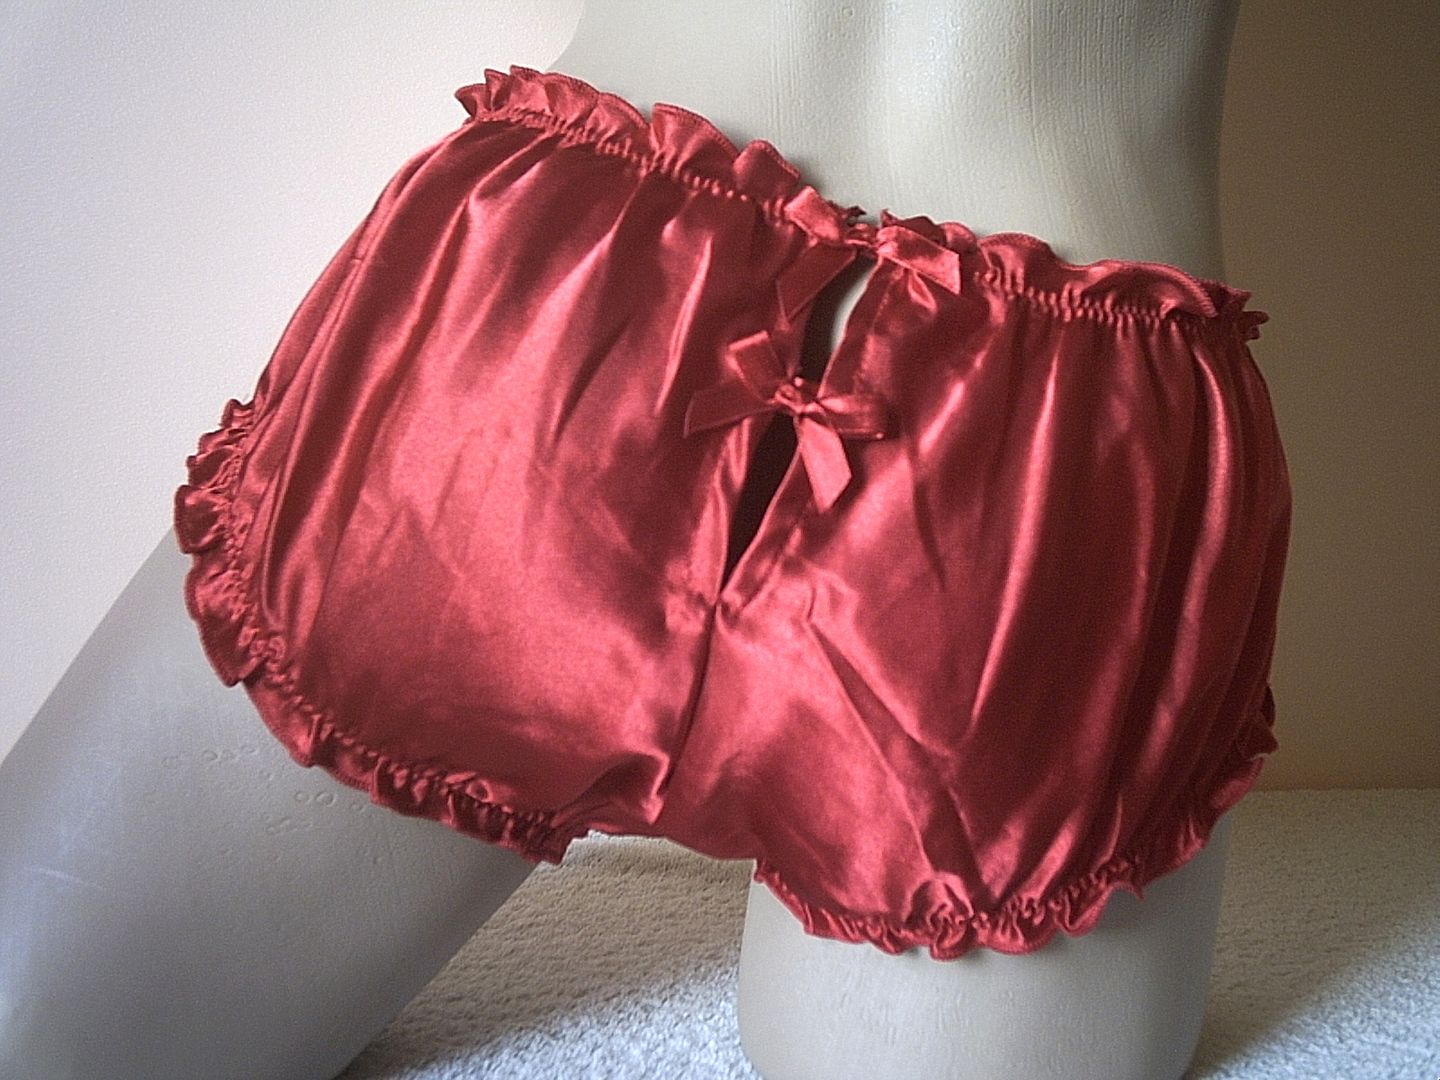 Cute Cherry Red Silky Satin Shorty Brief Panties Frilly Knickers UK M/L ...